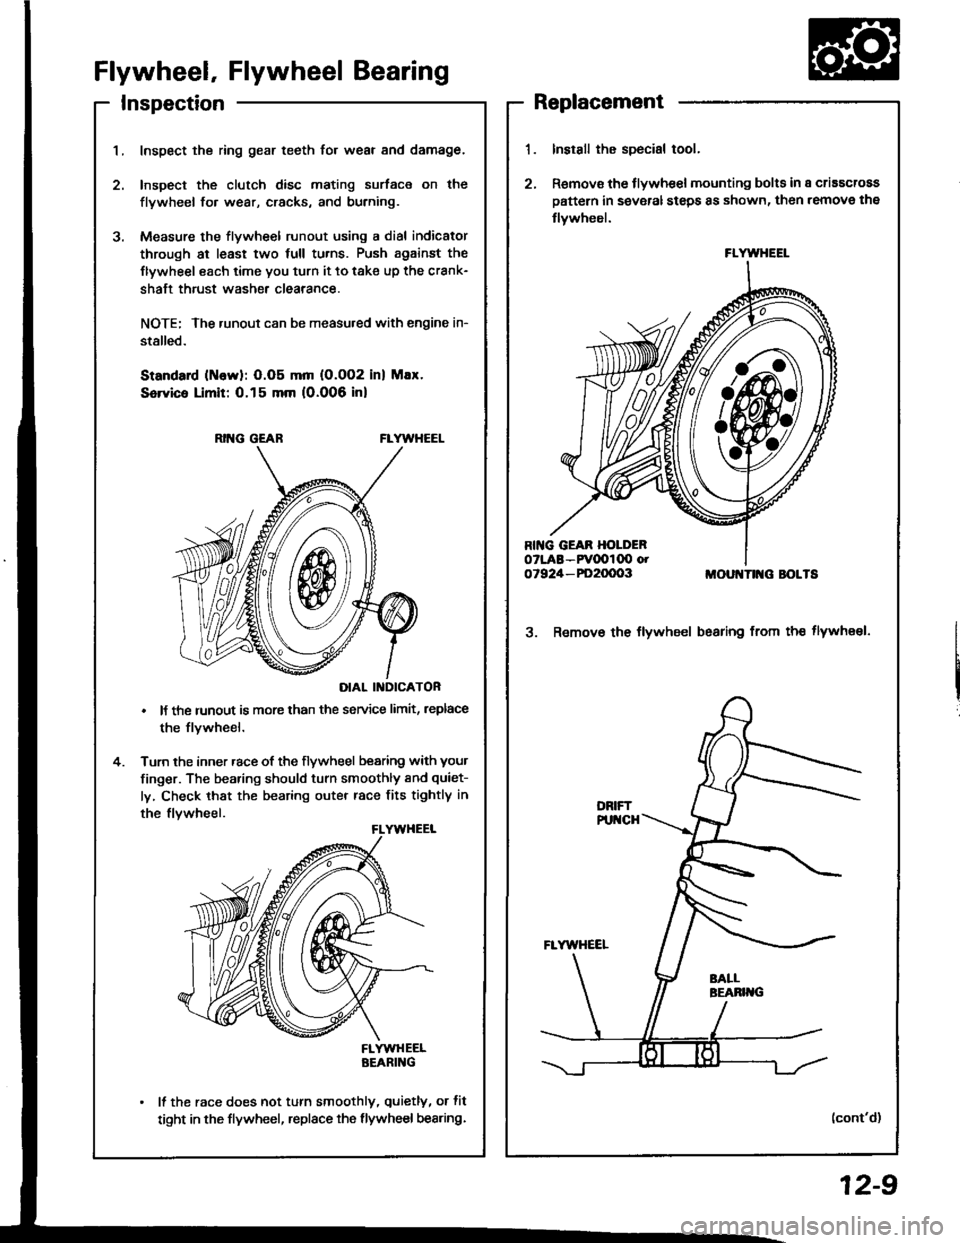 ACURA INTEGRA 1994  Service Repair Manual InspectionReplacement
Flywheel, Flywheel Bearing
Inspect the ring gear teeth for wear and damage.
Inspect the clutch disc mating surface on the
flywheel fo. wear, cracks, and burning.
Measure the flyw